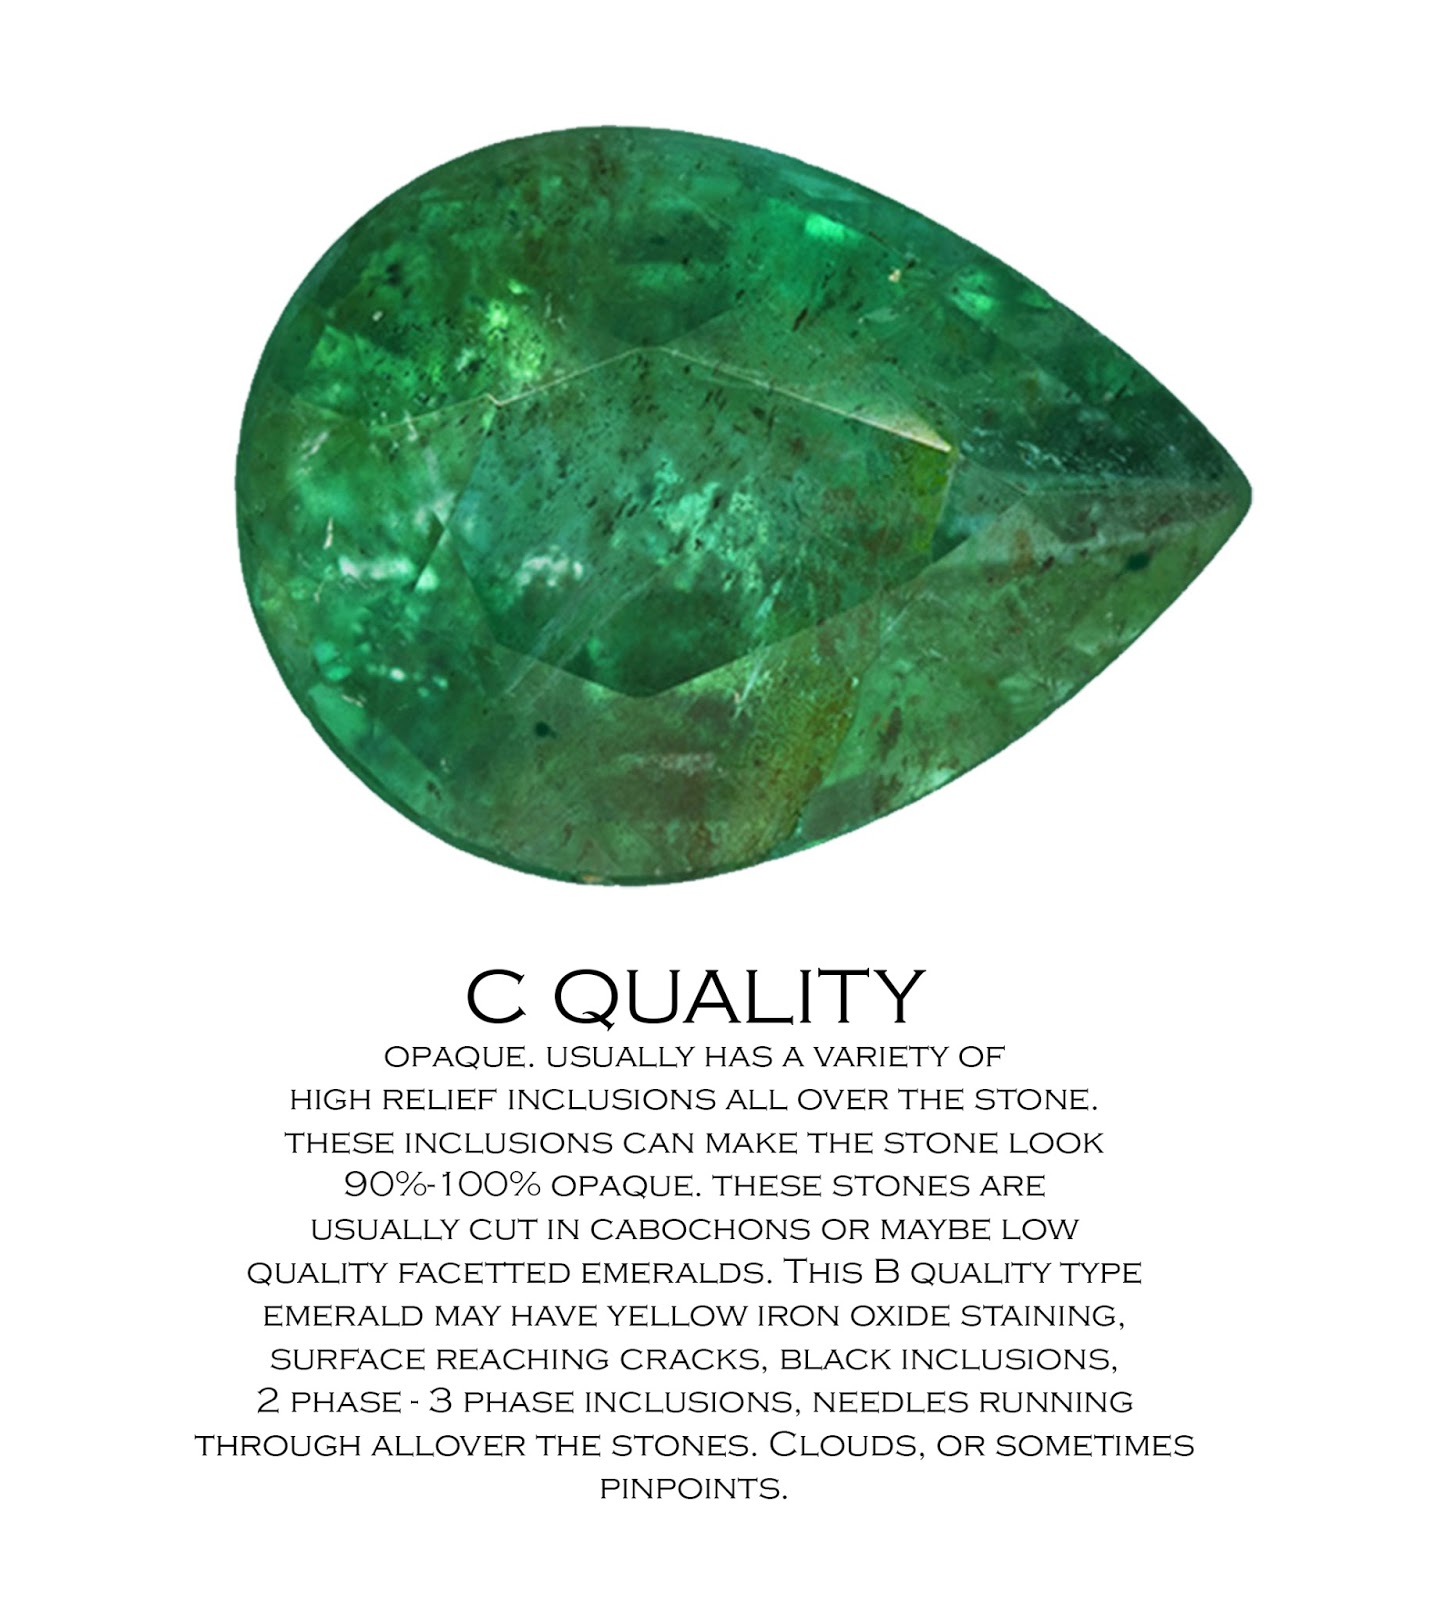 Emerald quality chart - World's first of a kind